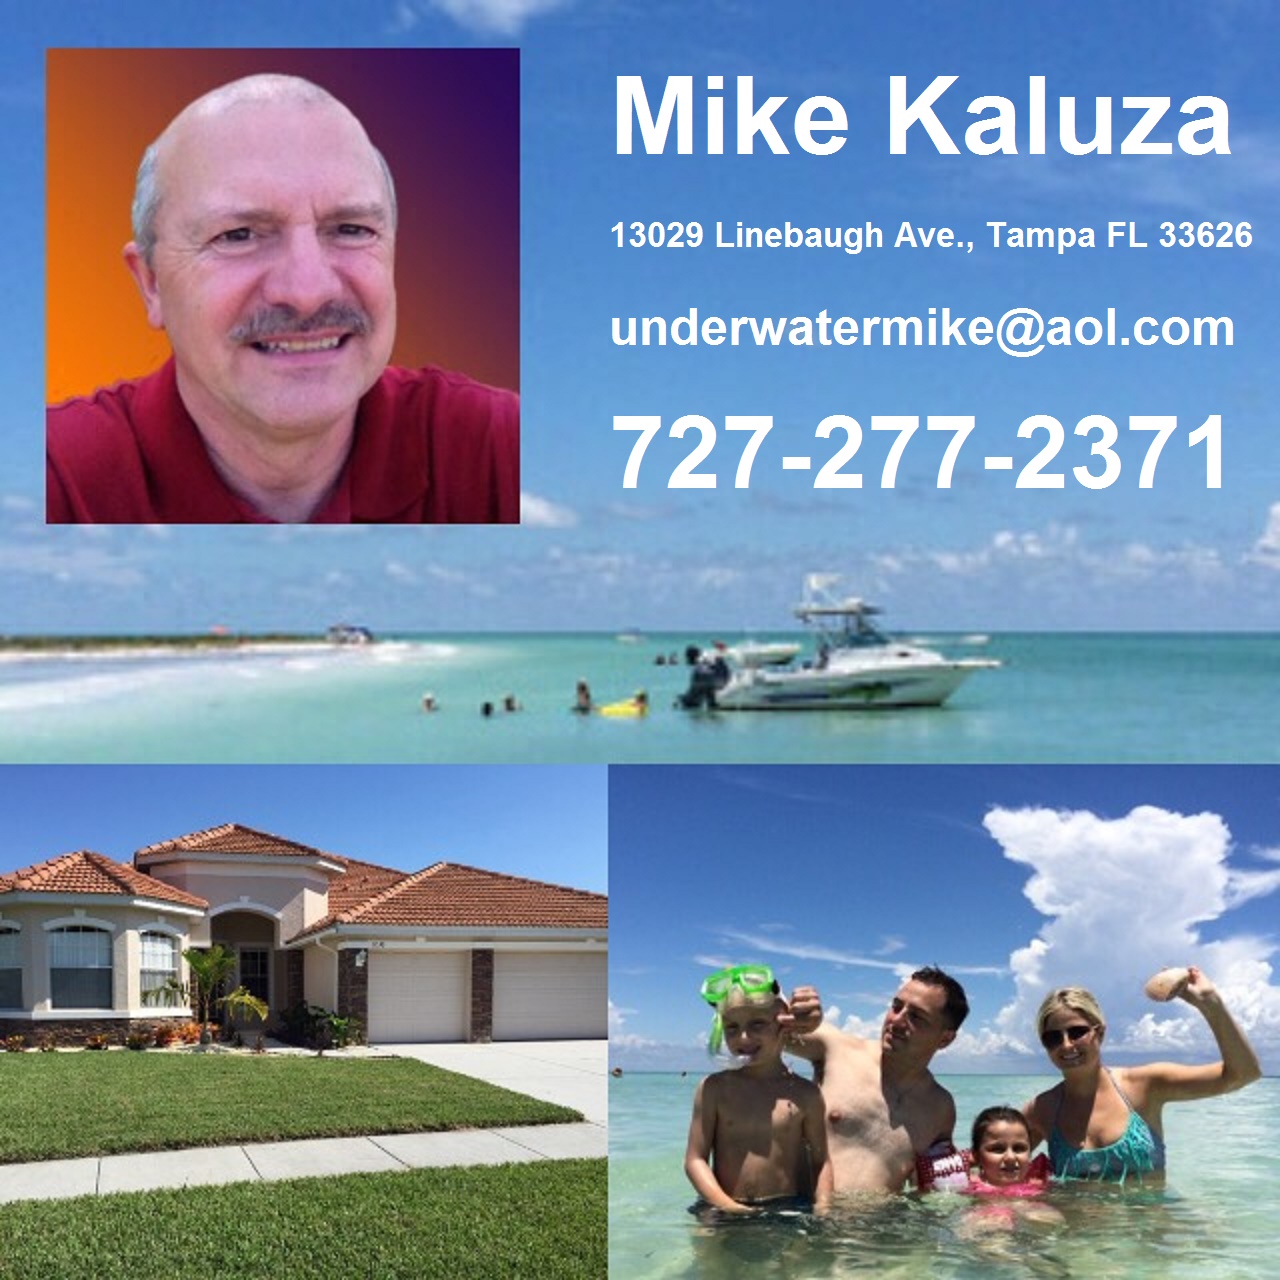 Mike Kaluza - Realtor at Future Home Realty 13029 Linebaugh Ave., Tampa FL 33626 (727) 277 - 2371 underwatermike@aol.com